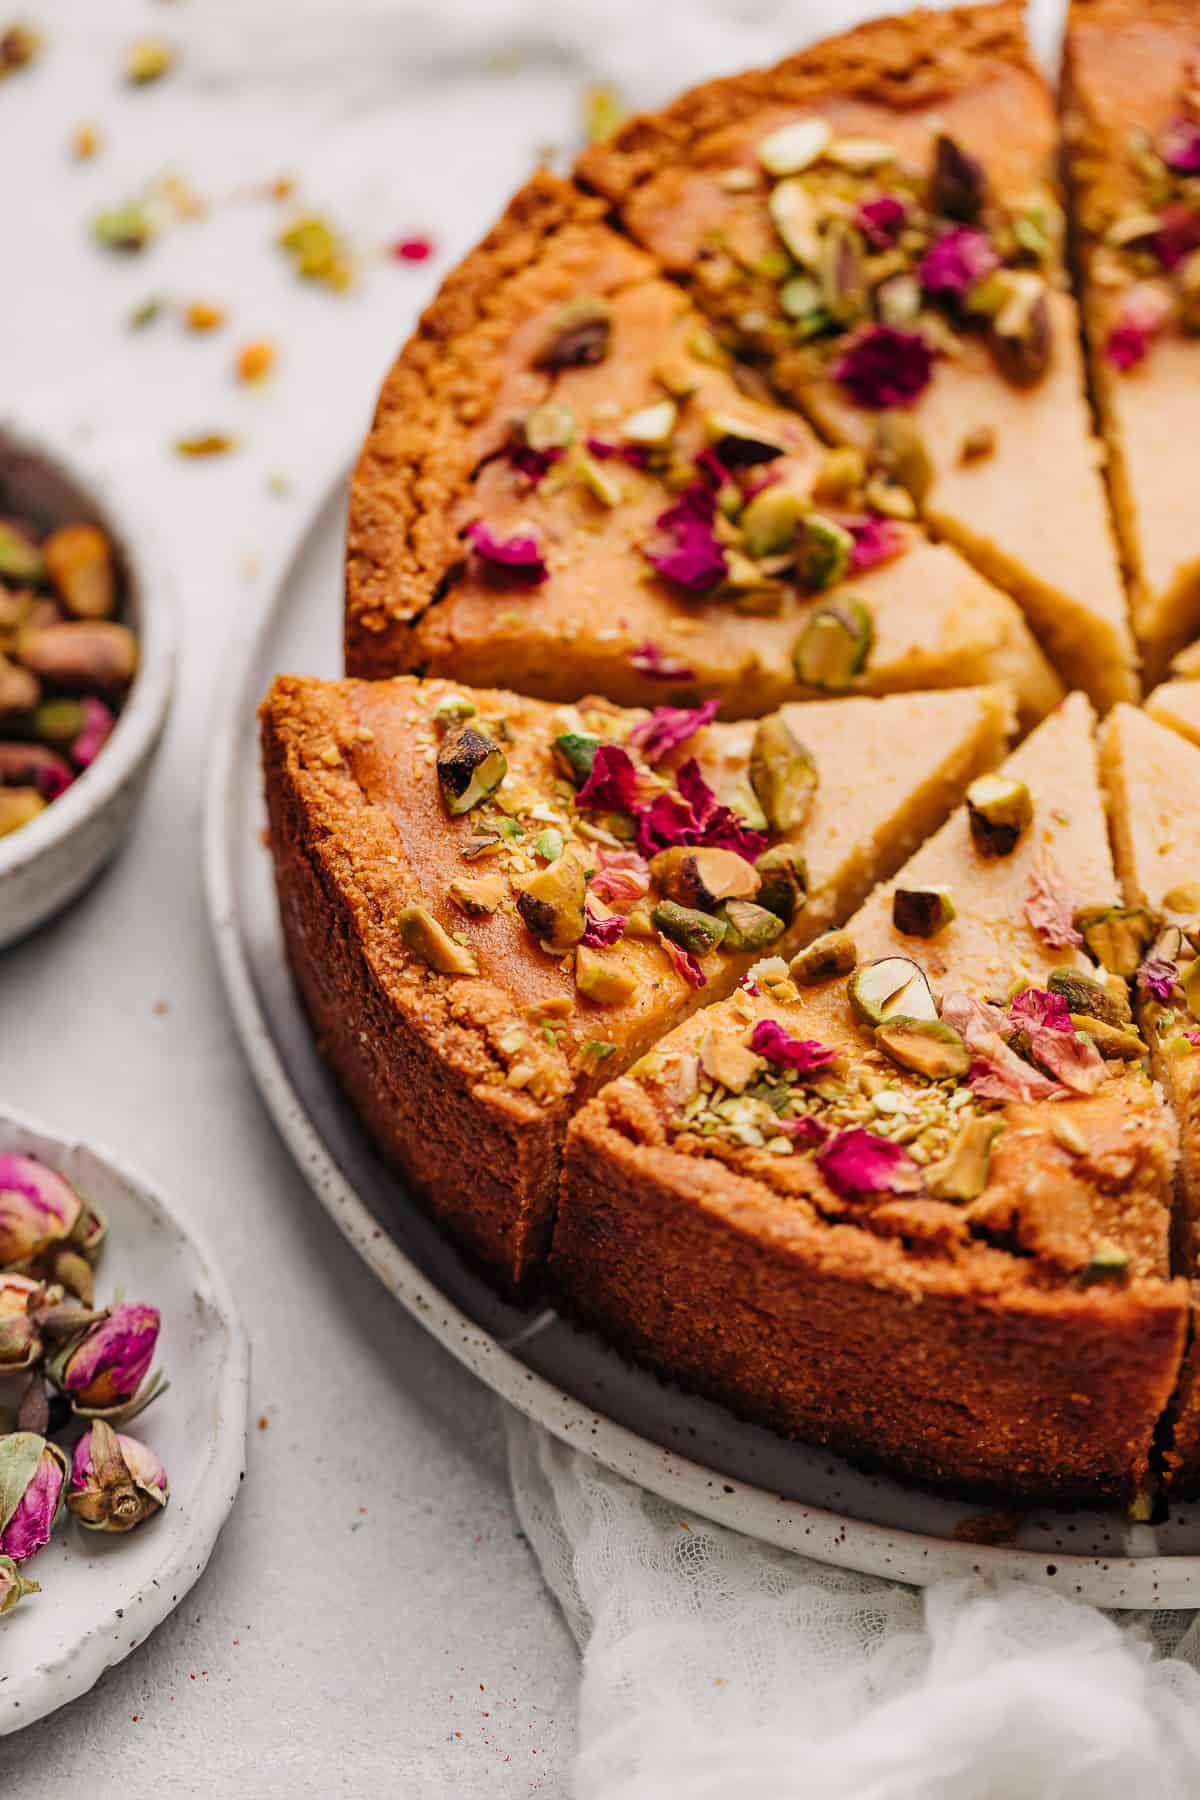 Slices of Persian Love Cake on a plate with small bowls of chopped pistachios and dried rose petals.